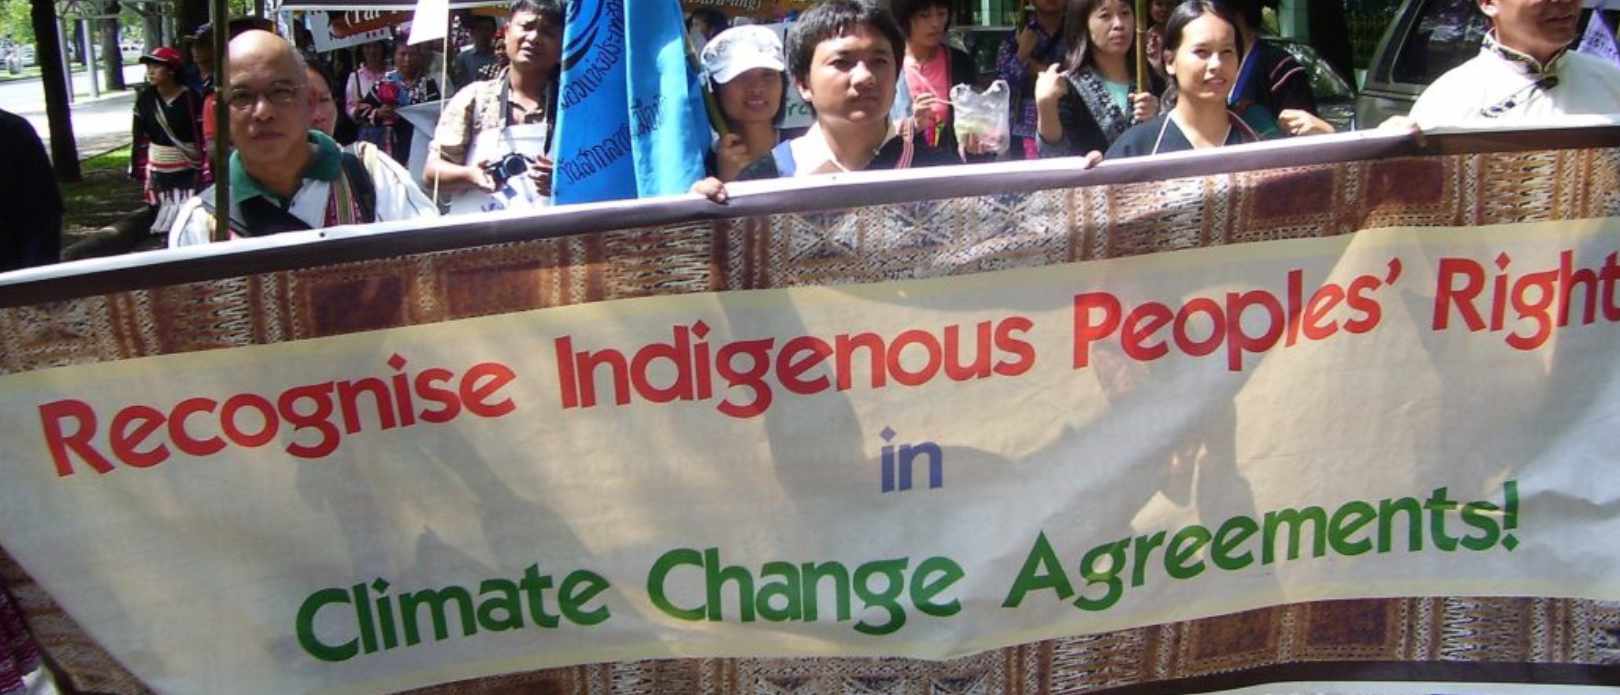 People demonstrating against climate change in Bangkok in 2009, holding a banner saying "Recognise Indigenous Peoples' Rights in Climate Change Agreements".